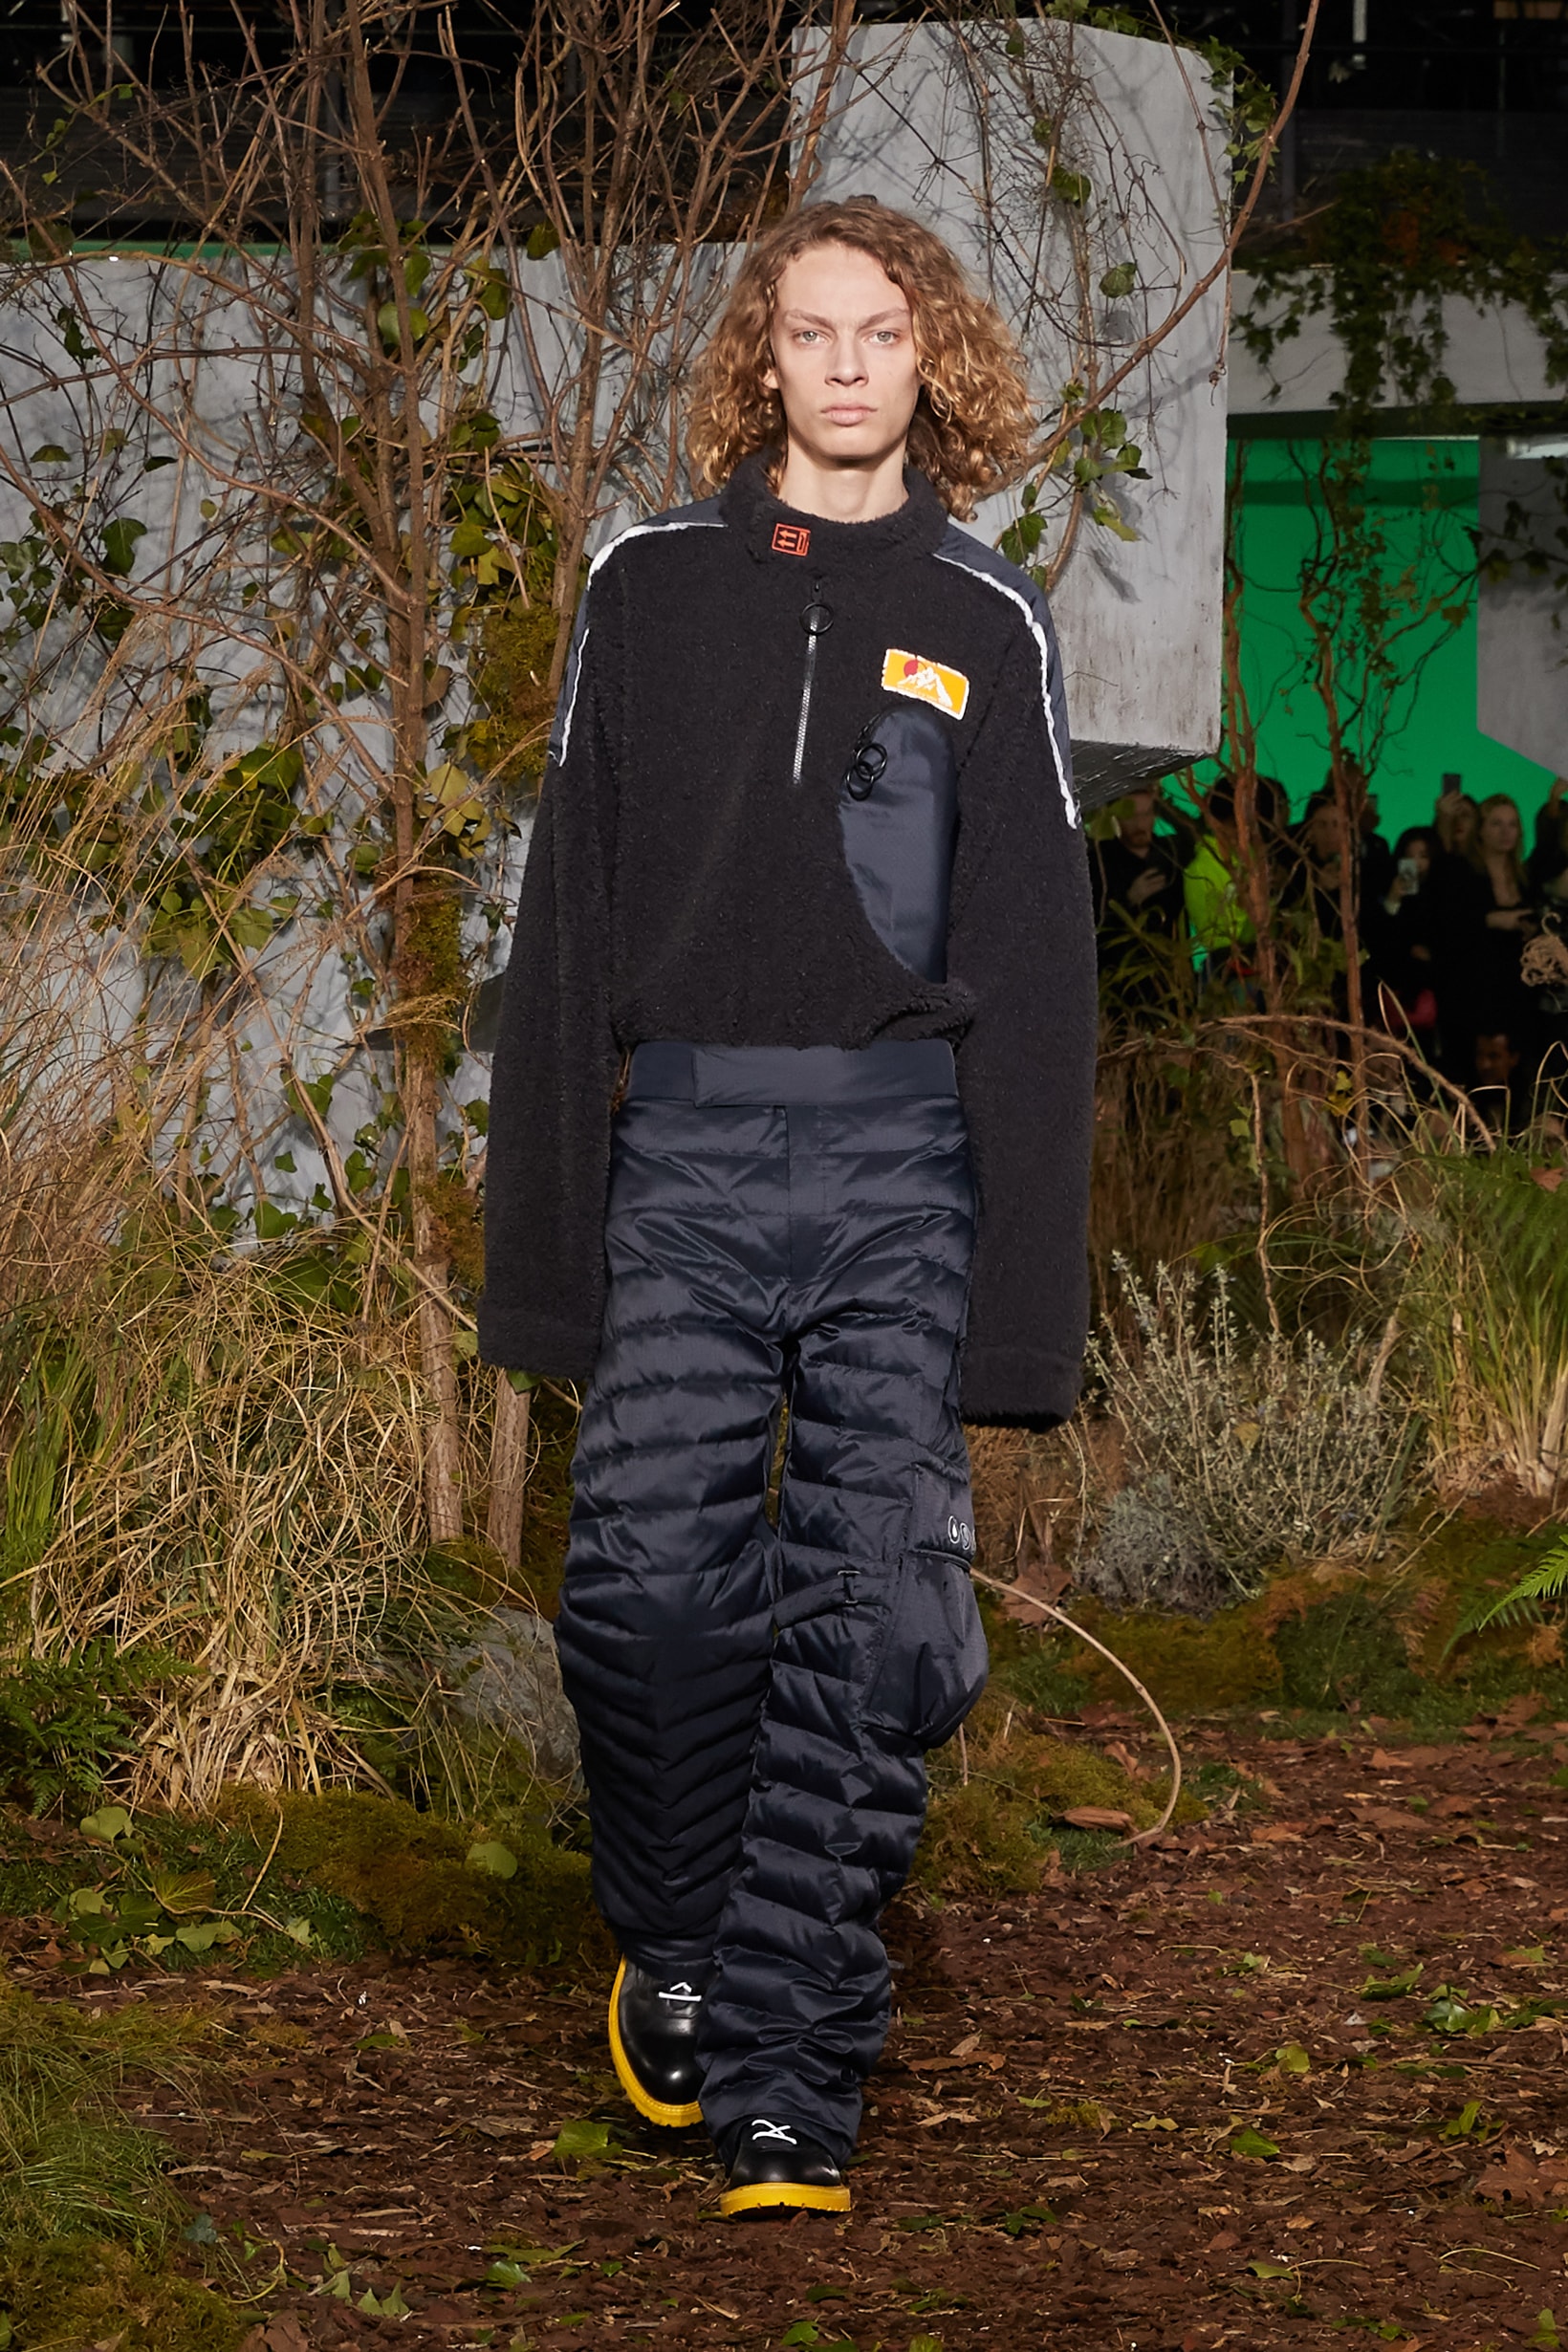 Off-White Virgil Abloh Fall Winter 2019 Paris Fashion Week Show Collection Backstage Sweater Pants Black